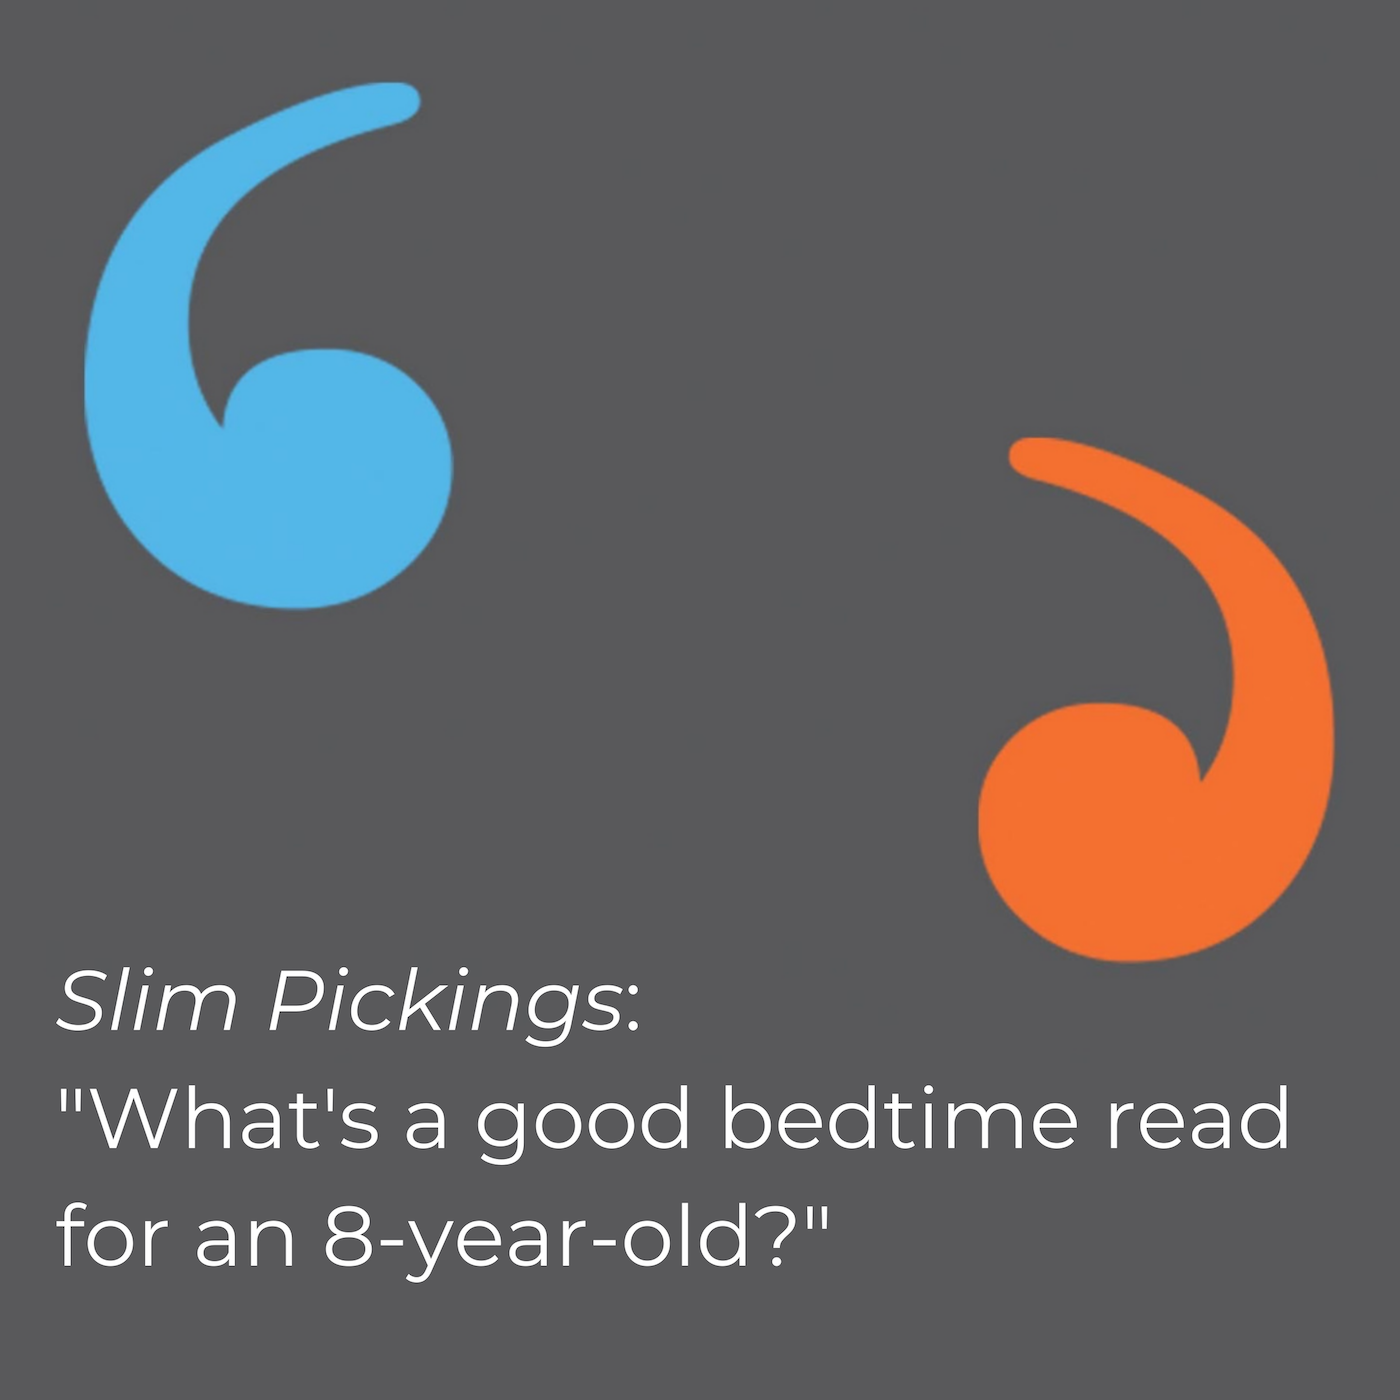 Slim Pickings: What's a Good Bedtime Read For an 8 Year Old?